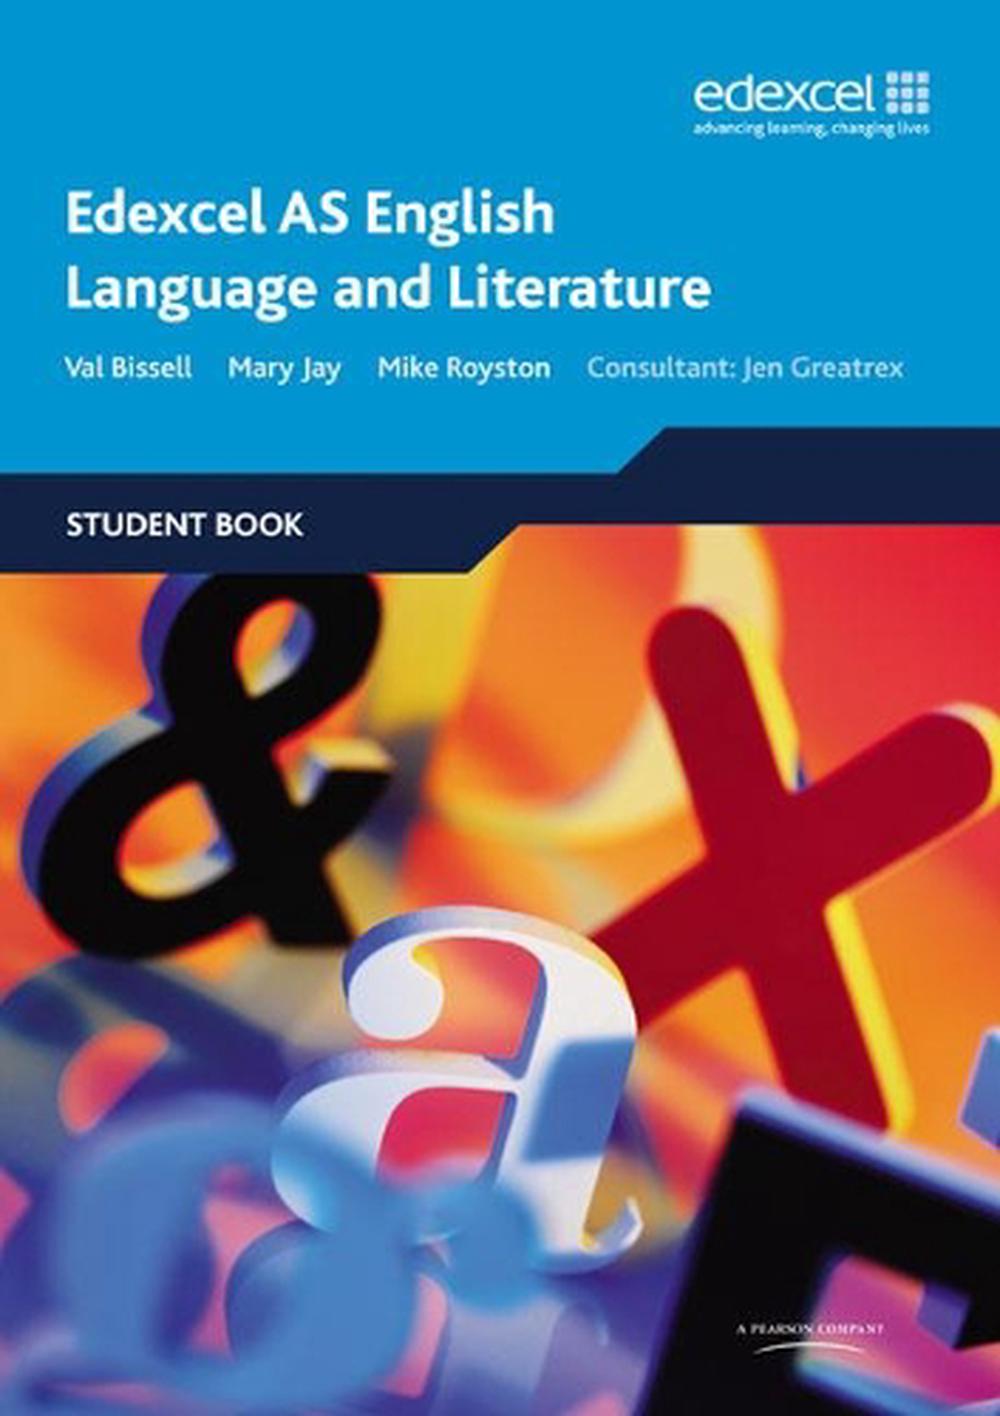 edexcel a level english language and literature coursework examples